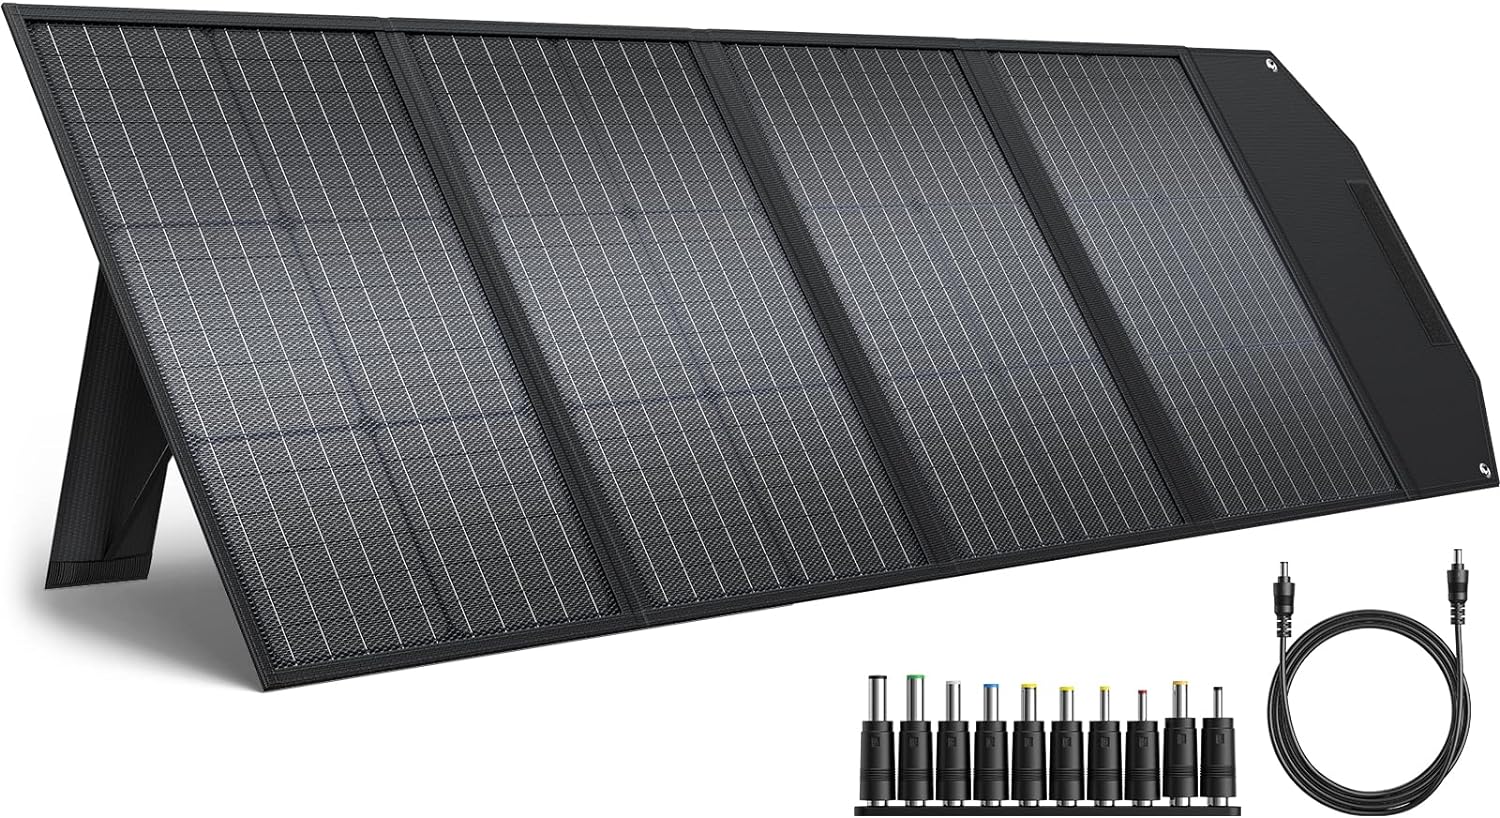 BROWEY Foldable Solar Panel 120W, IP68 Waterproof Portable Solar Panel Kit with QC 3.0 and USB-C Outputs, Adjustable Stand Foldable Solar Charger for Outdoor RV Camping Van Off-Grid Solar Backup - BROWEY 120W Solar Panel Review